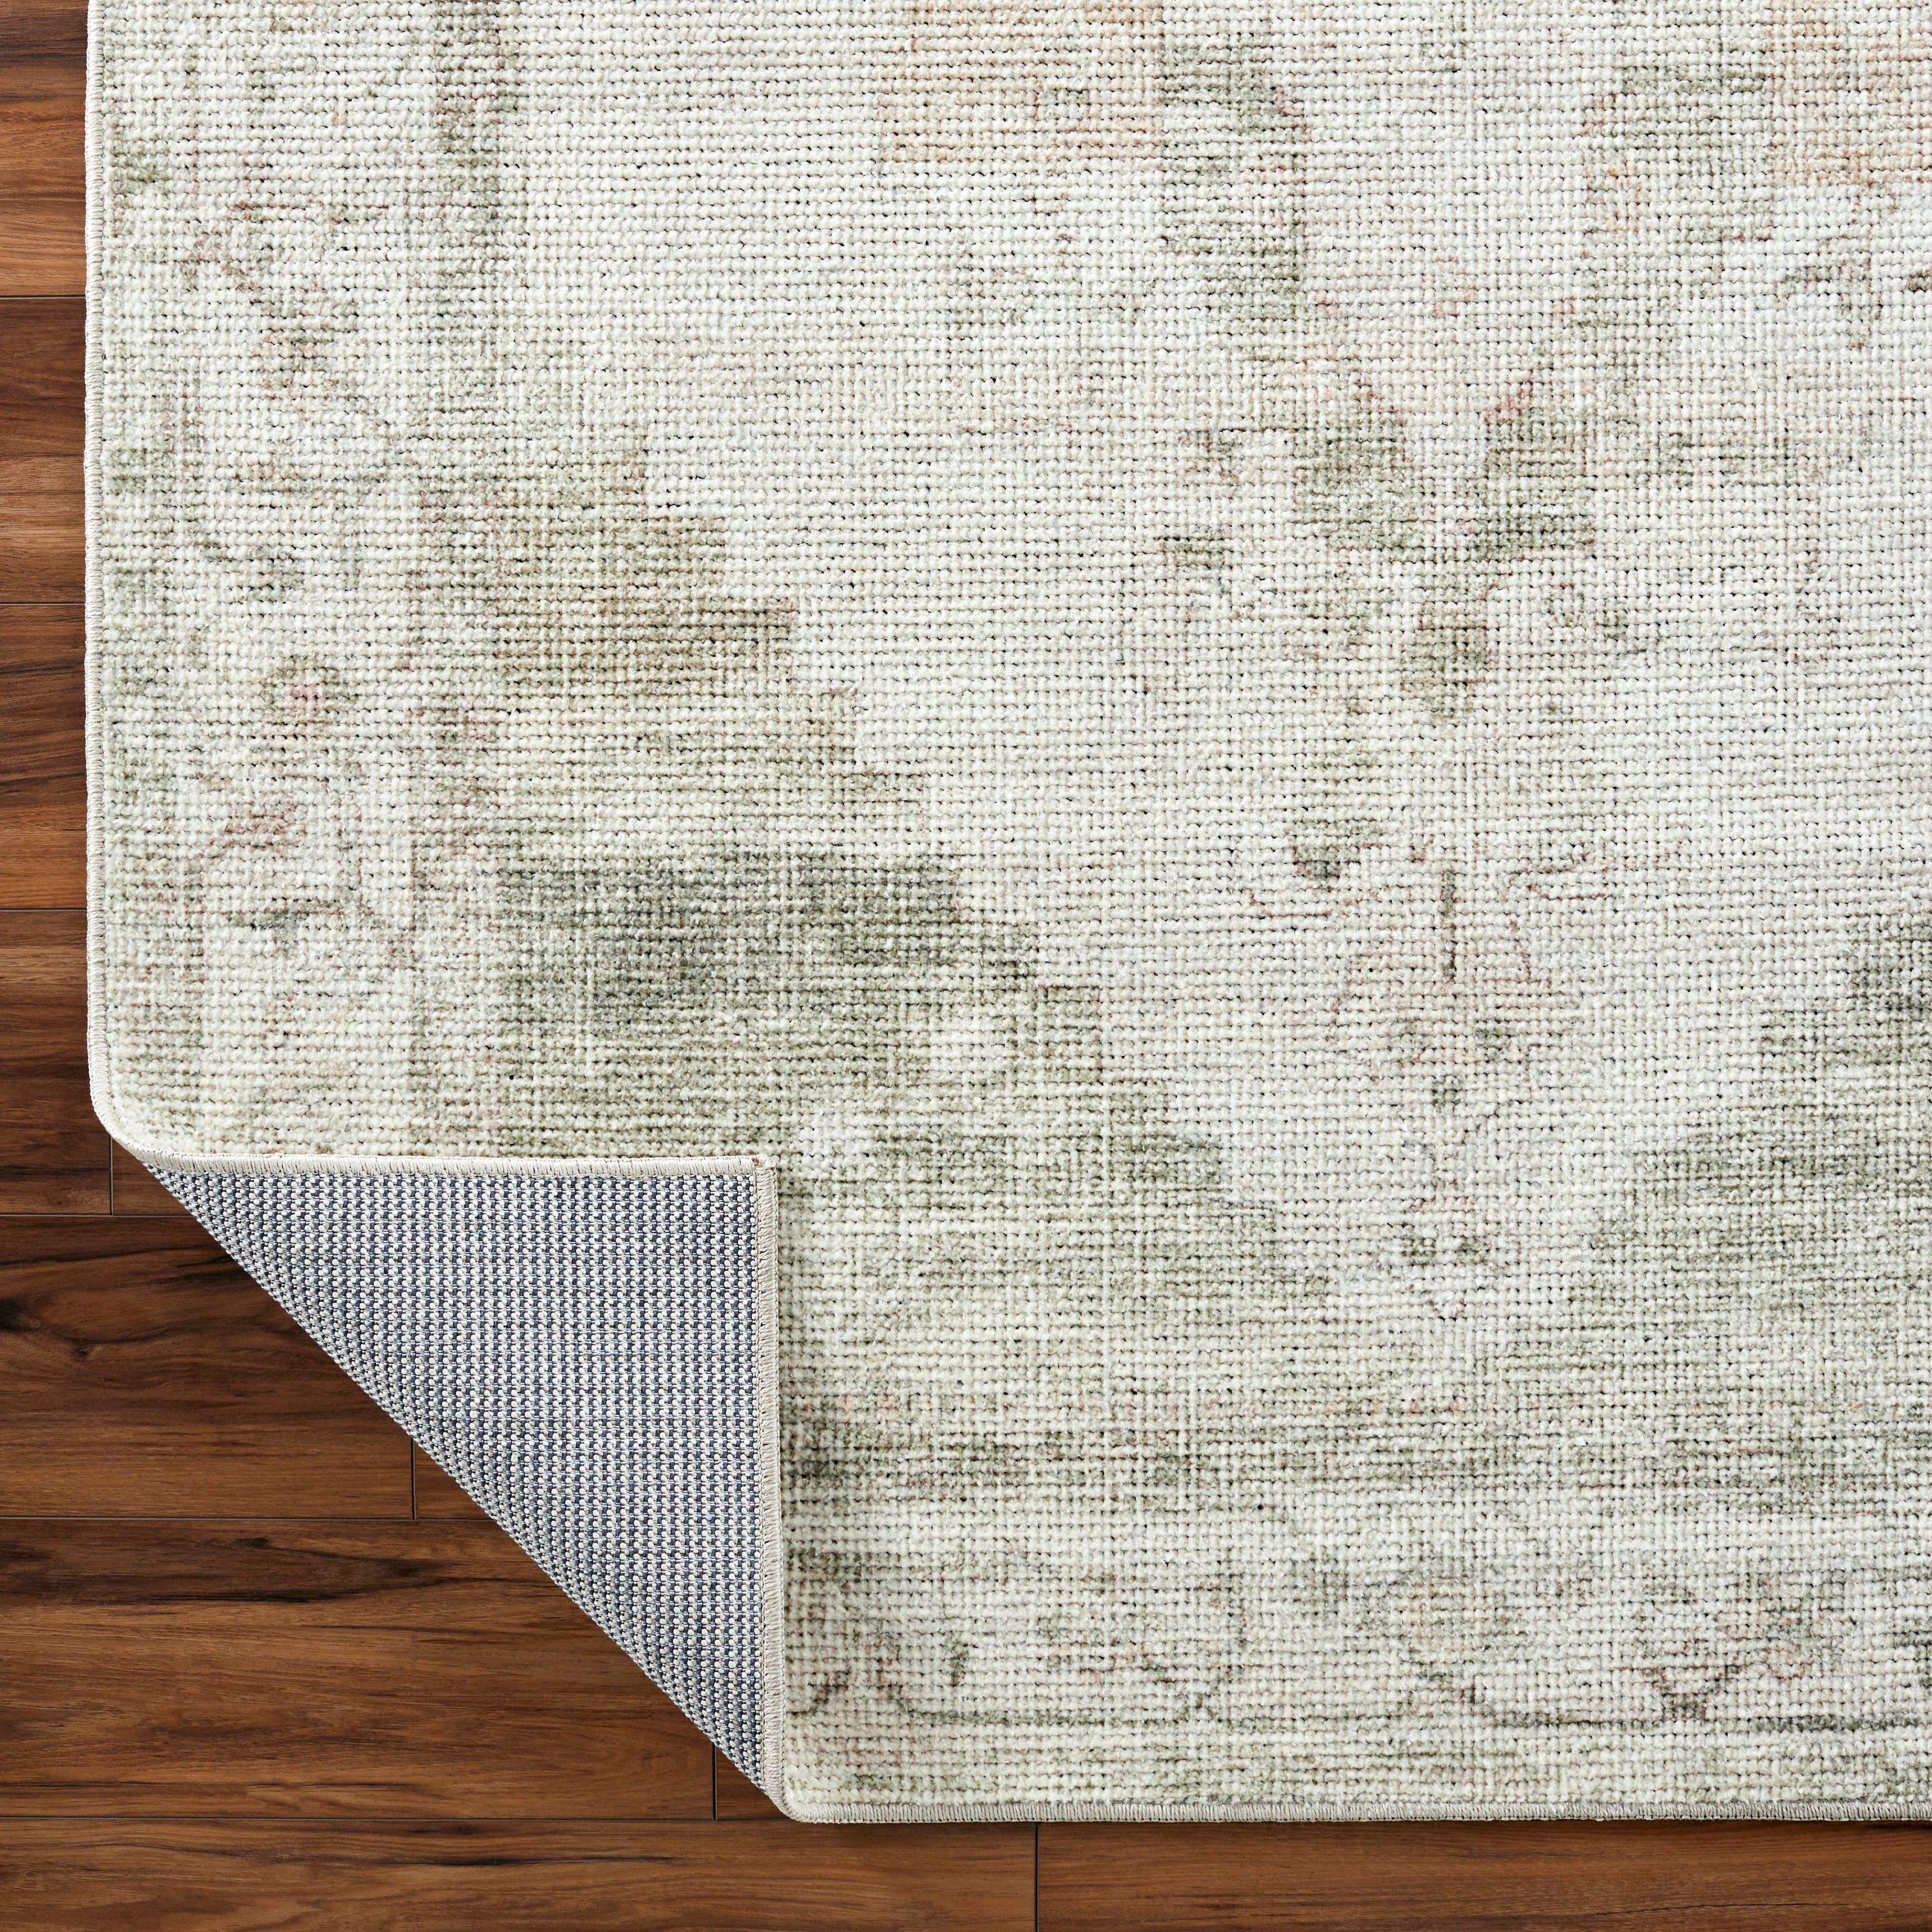 The Luca Olive Medallion Rug from Becki Owens x Surya is a vintage inspired collection full of rich design and subtle versatile colors that will bring a curated and collected feel to any room. Amethyst Home provides interior design, new construction, custom furniture, and area rugs in the Newport Beach metro area.